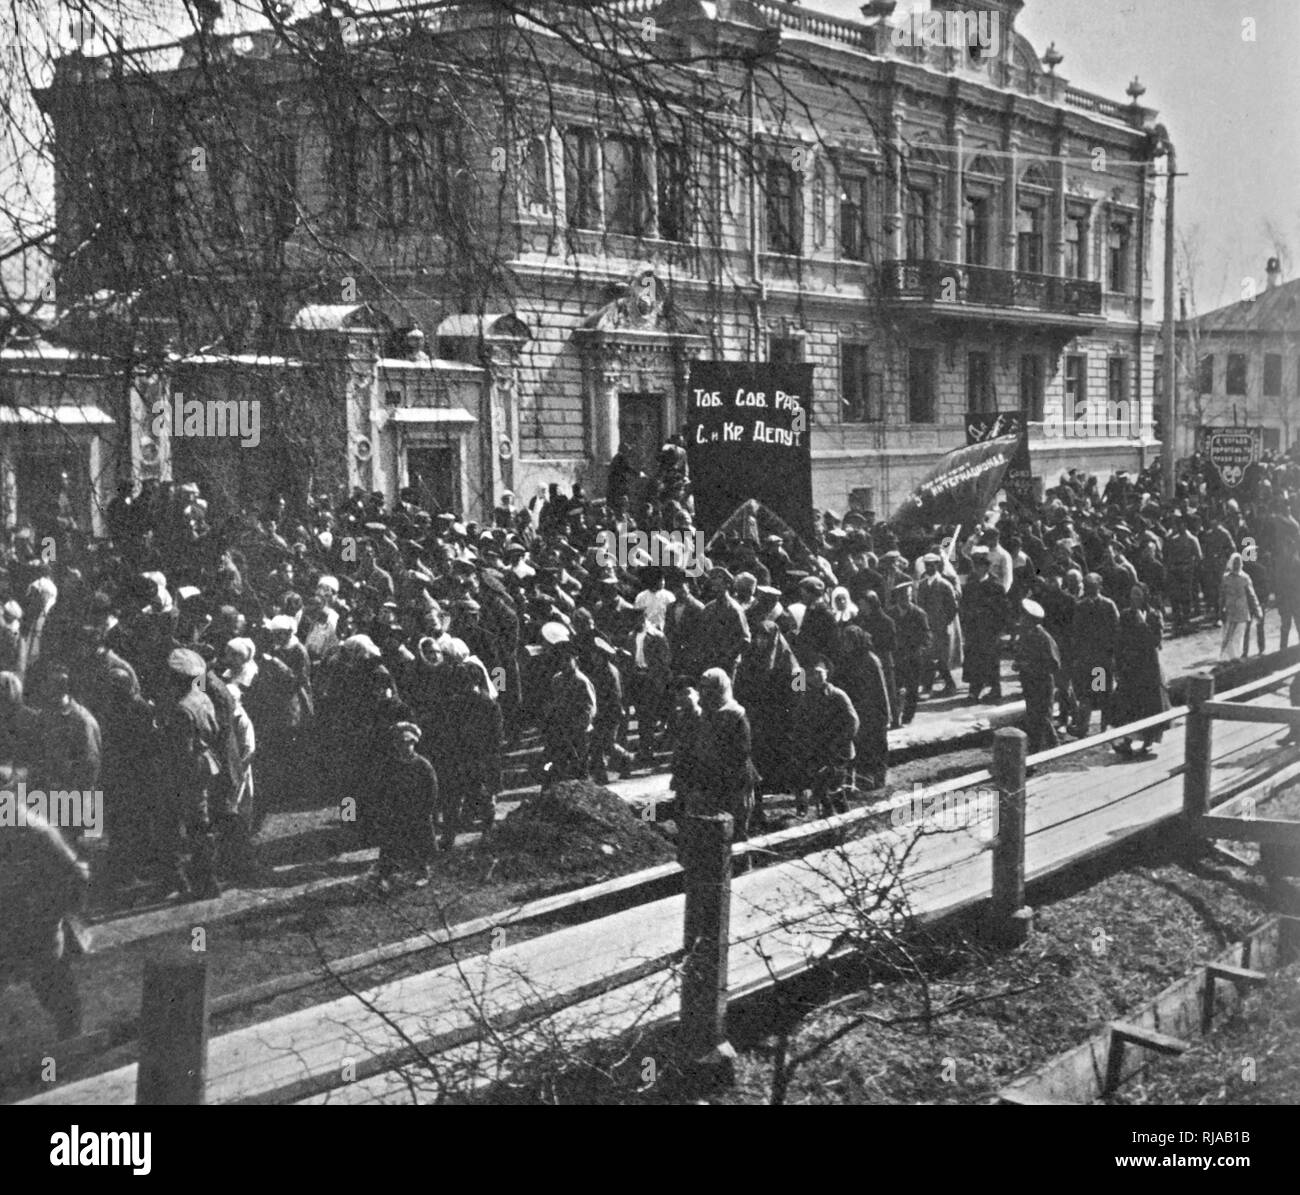 Russian Revolution: Communist march passes the house in Tobolsk, Siberia where the Russian imperial family was imprisoned. The Governor's Mansion, known as Kuklin House was built by merchant Ivan Kuklin in the 1790s. On 12 August 1917, the former Russian Emperor Nicholas II, his wife; five children; and forty-five retainers were imprisoned in the mansion. They remained there until April 1918 Stock Photo